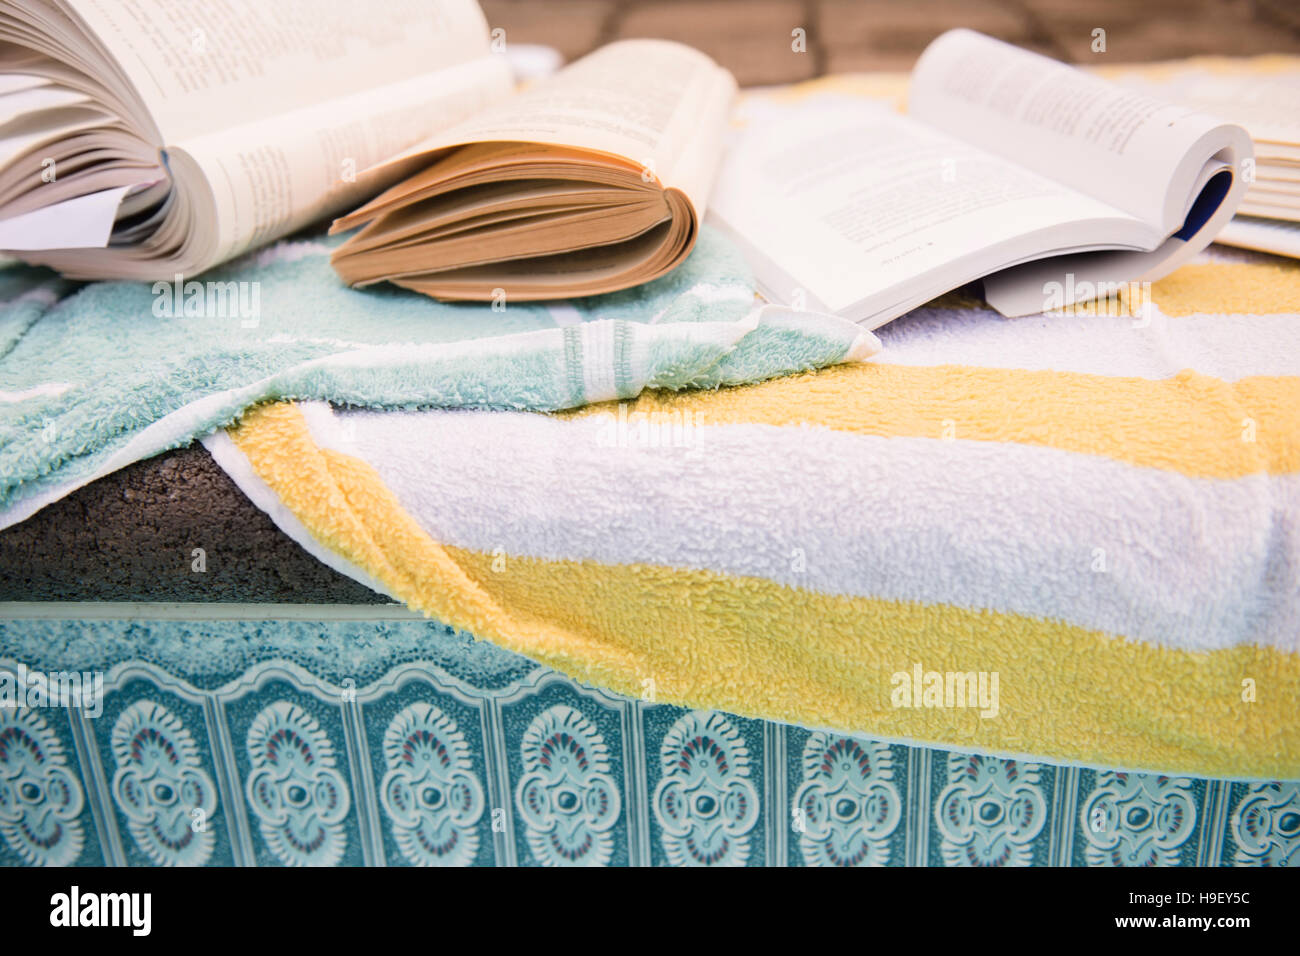 Books and towels at the edge of swimming pool Stock Photo